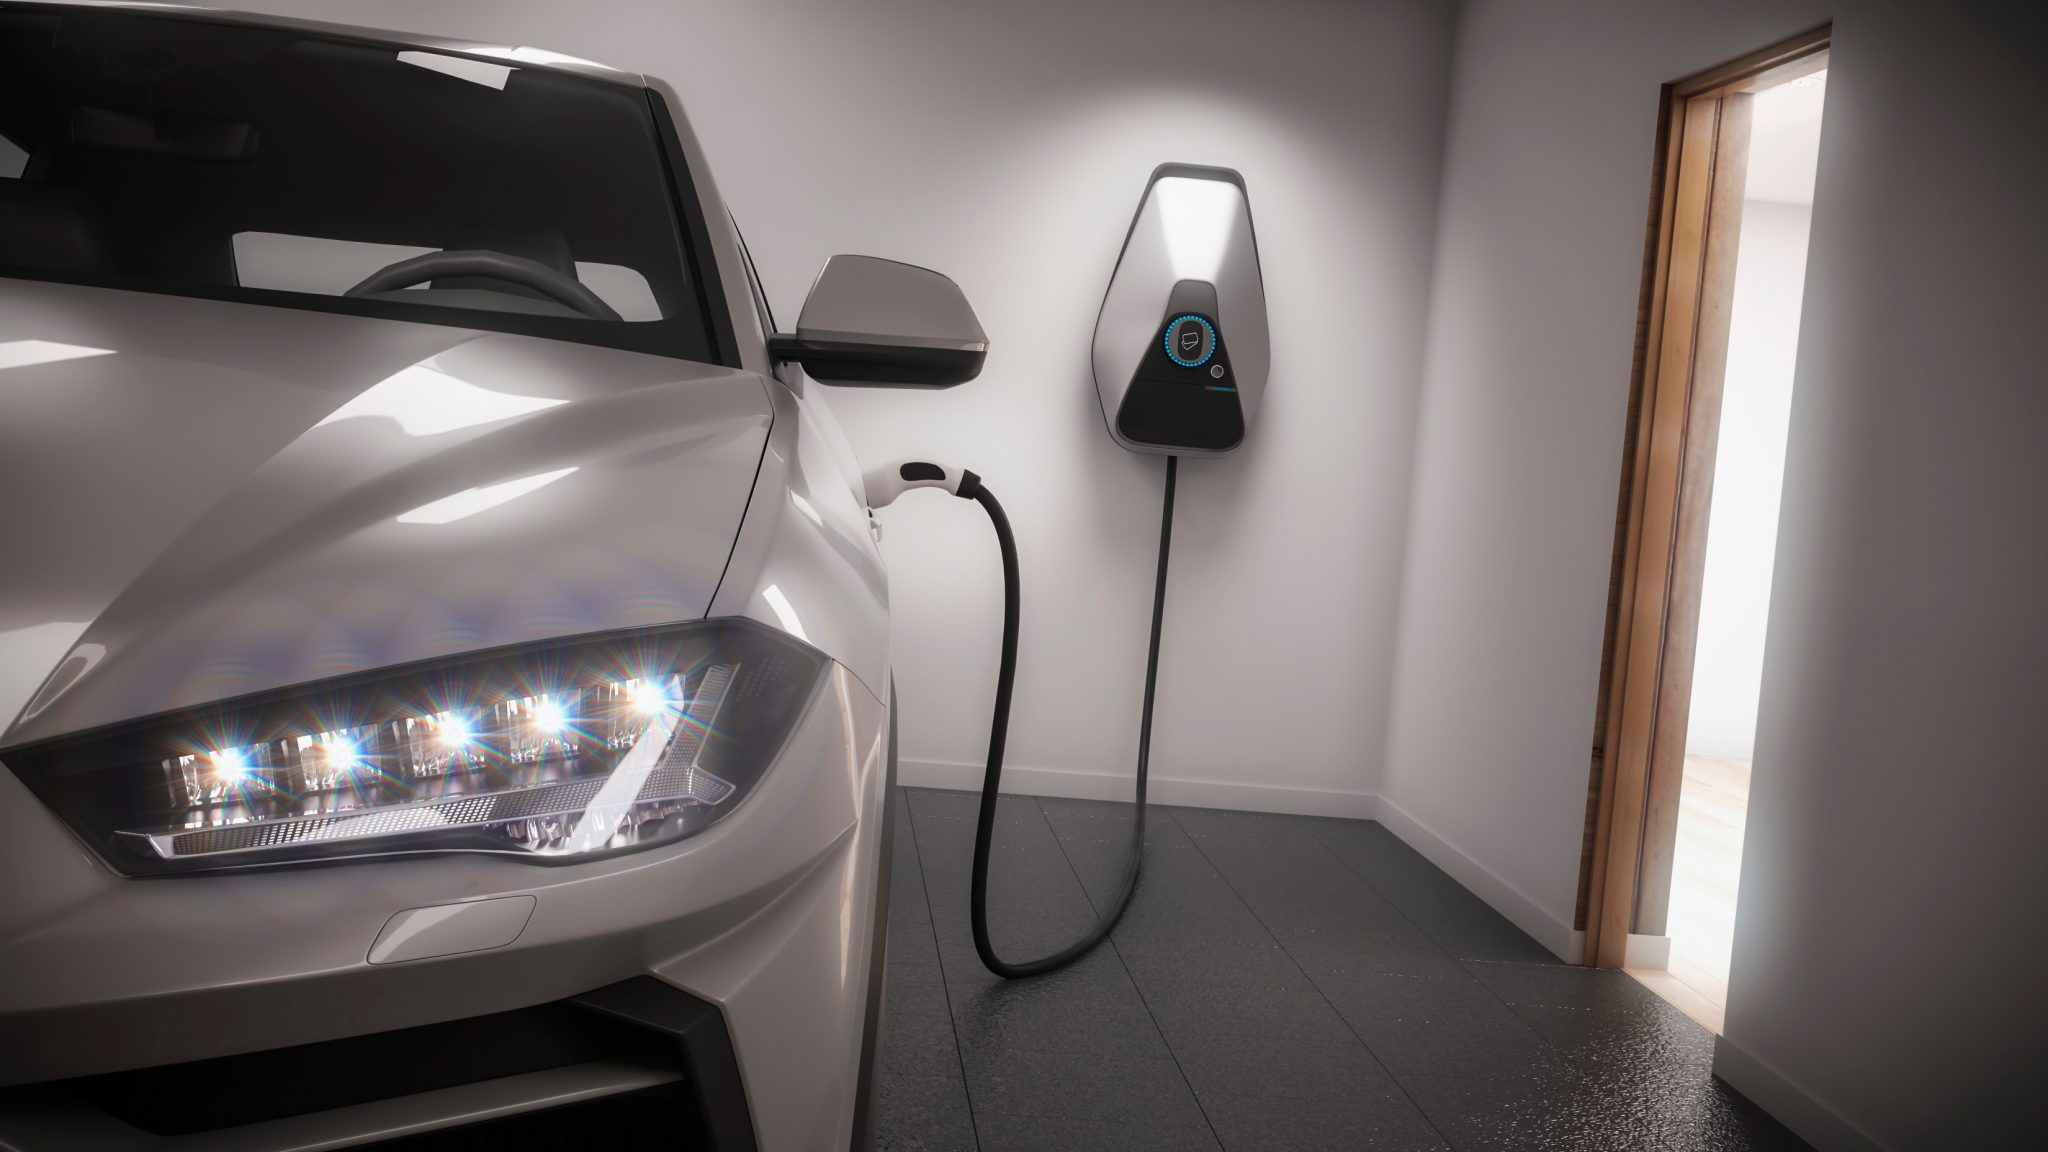 EV Home Charger Grant now available to Company Car Users Ireland's